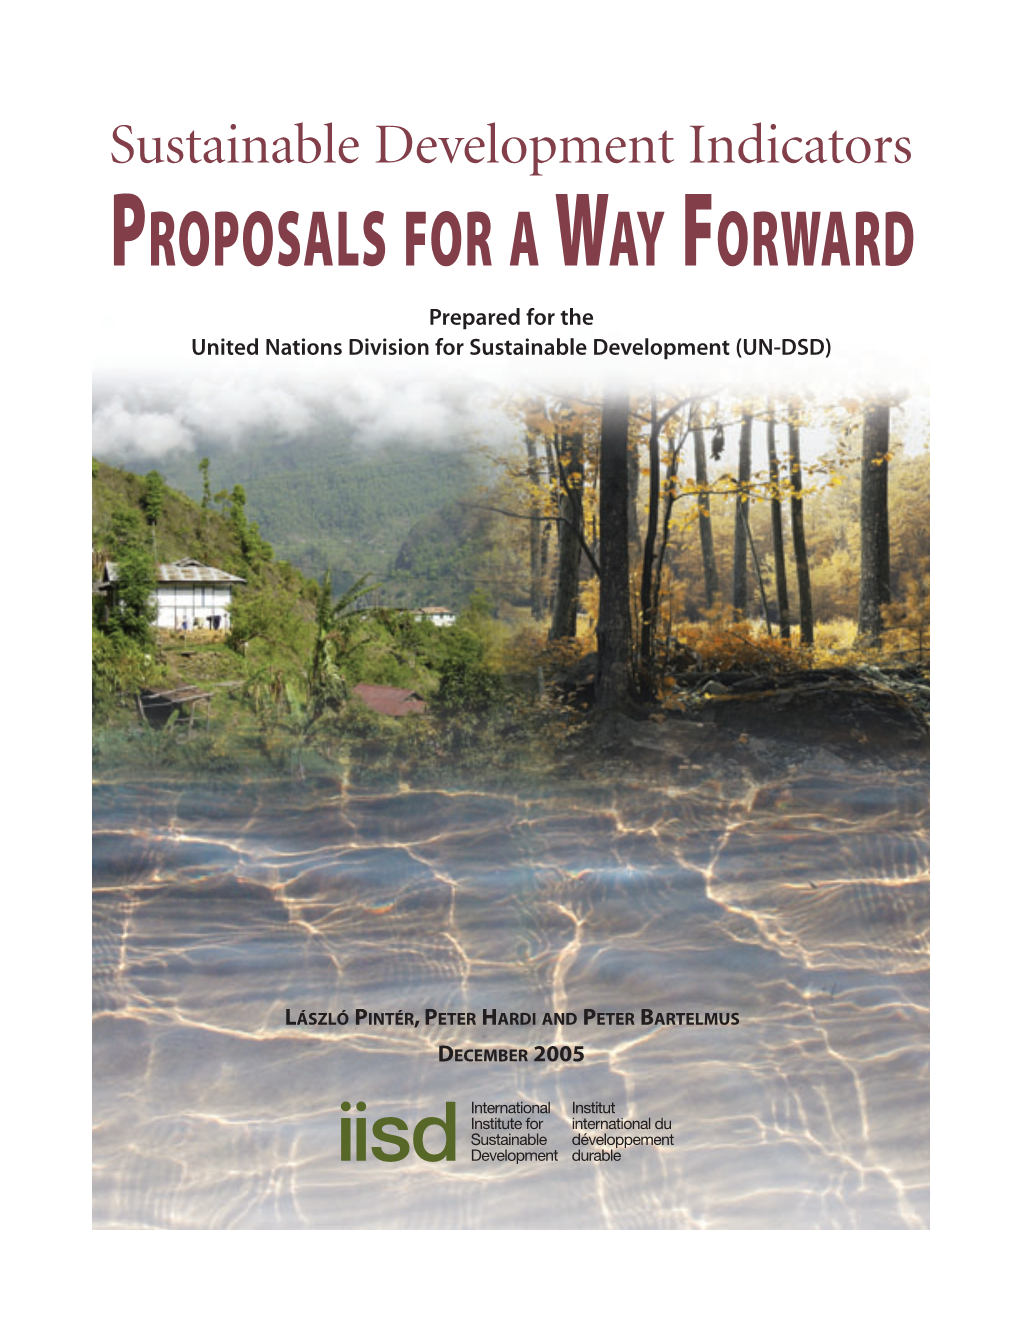 Sustainable Development Indicators: Proposals for the Way Forward